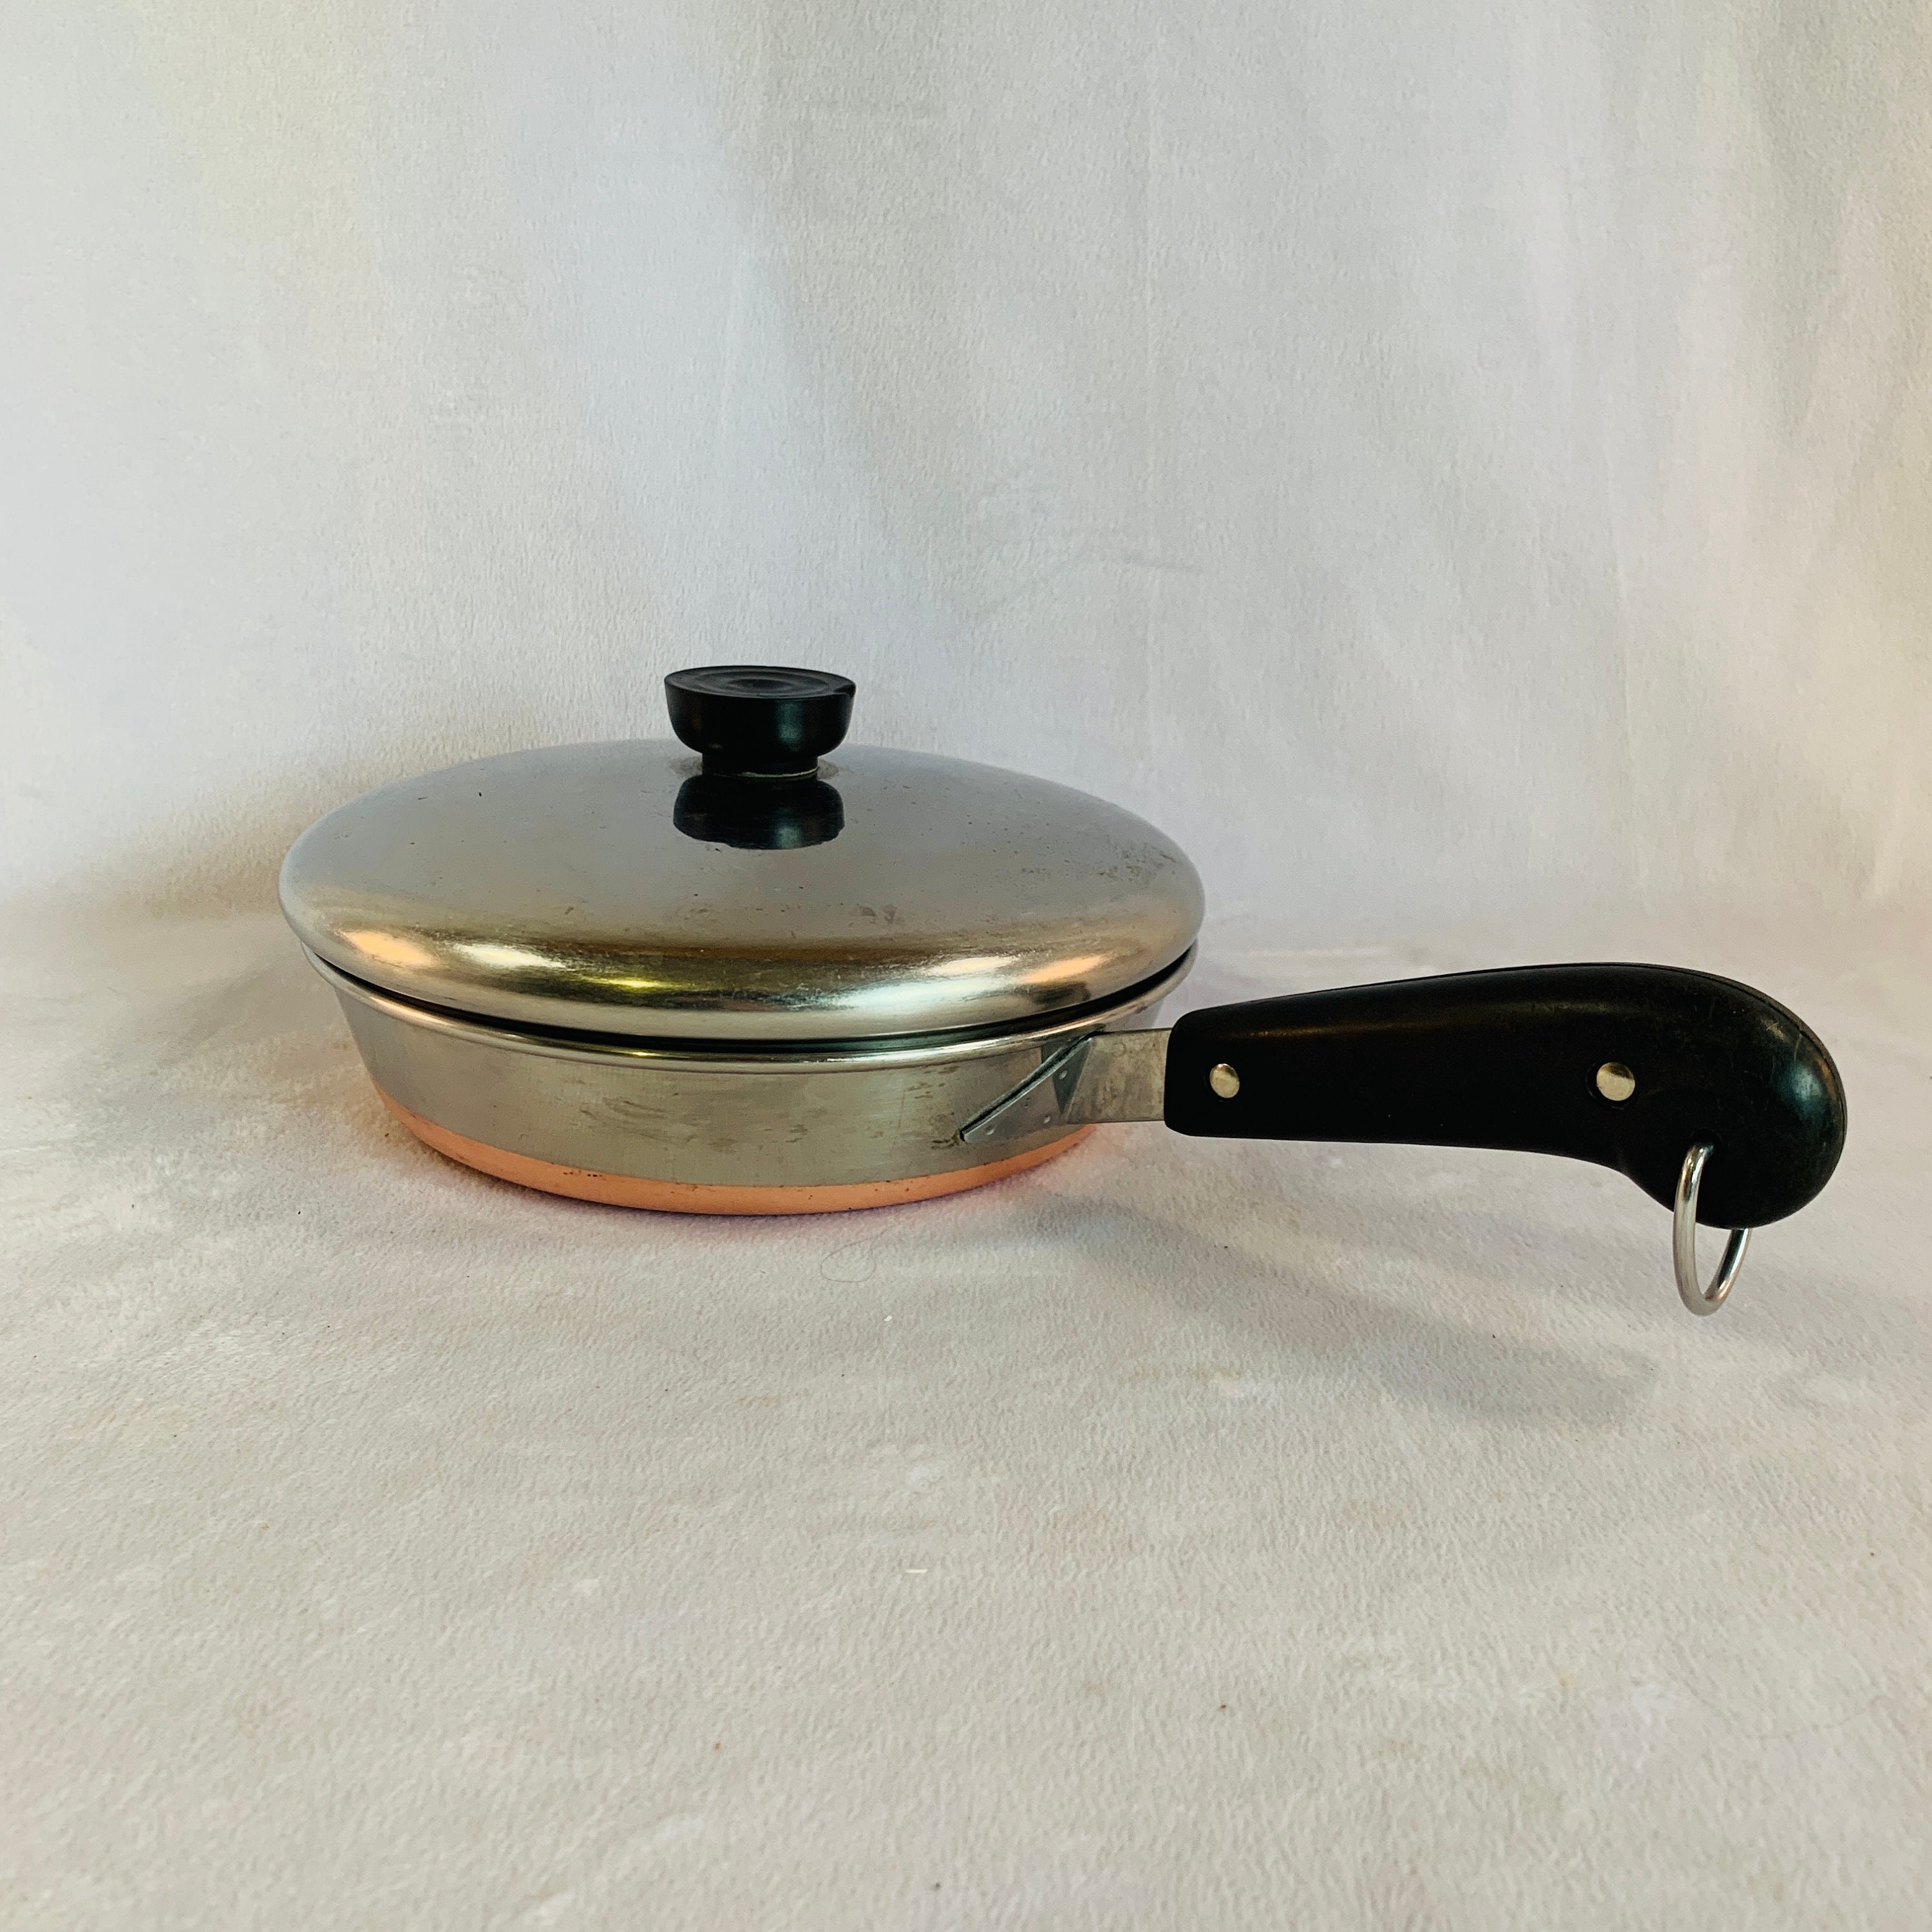 Vintage Revere Ware 6 Inch Stainless Fry Pan copper bottom Made in